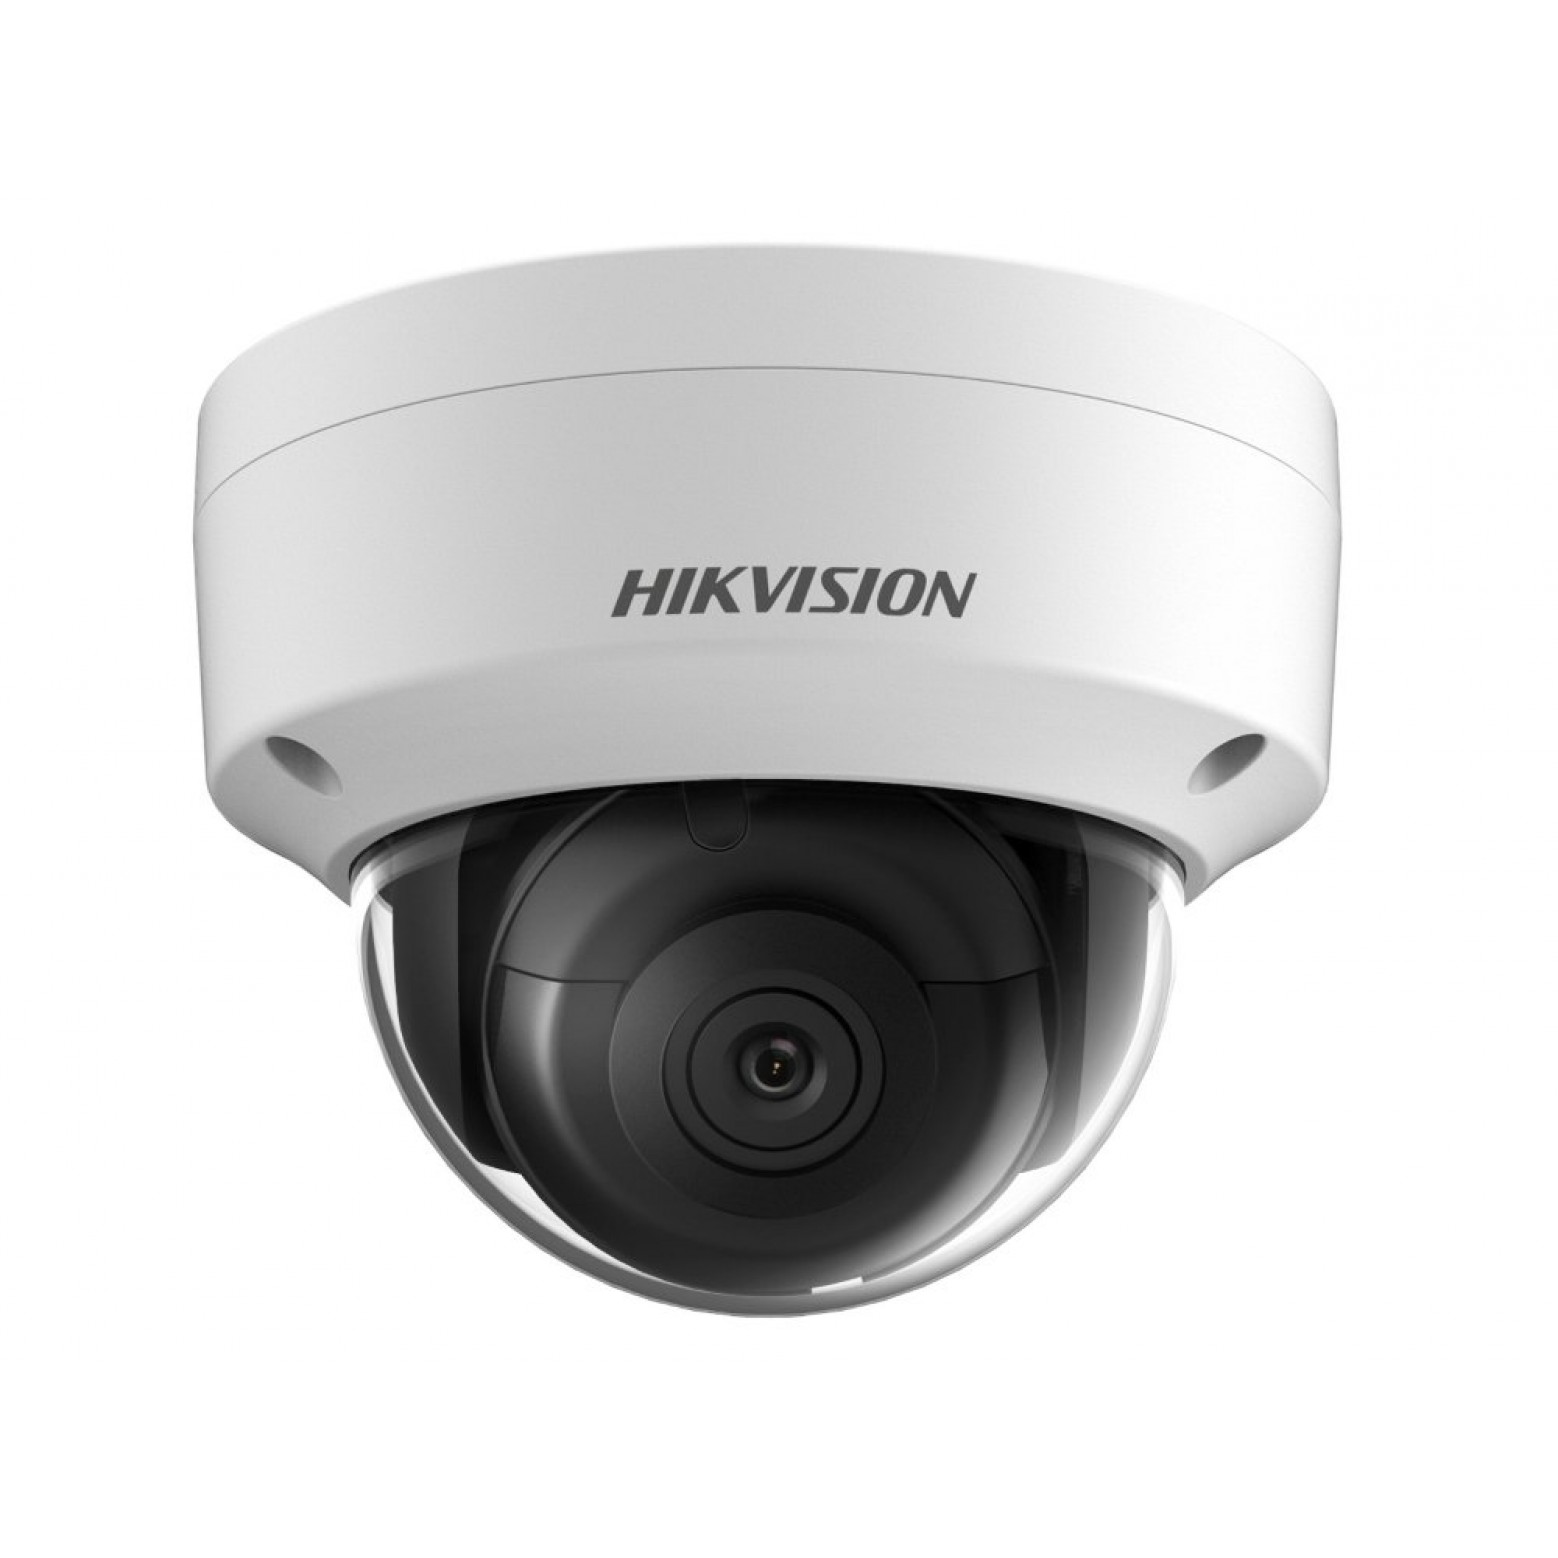 Hikvision DS-2CD2125FWD-I Ultra-Low Light Dome Camera